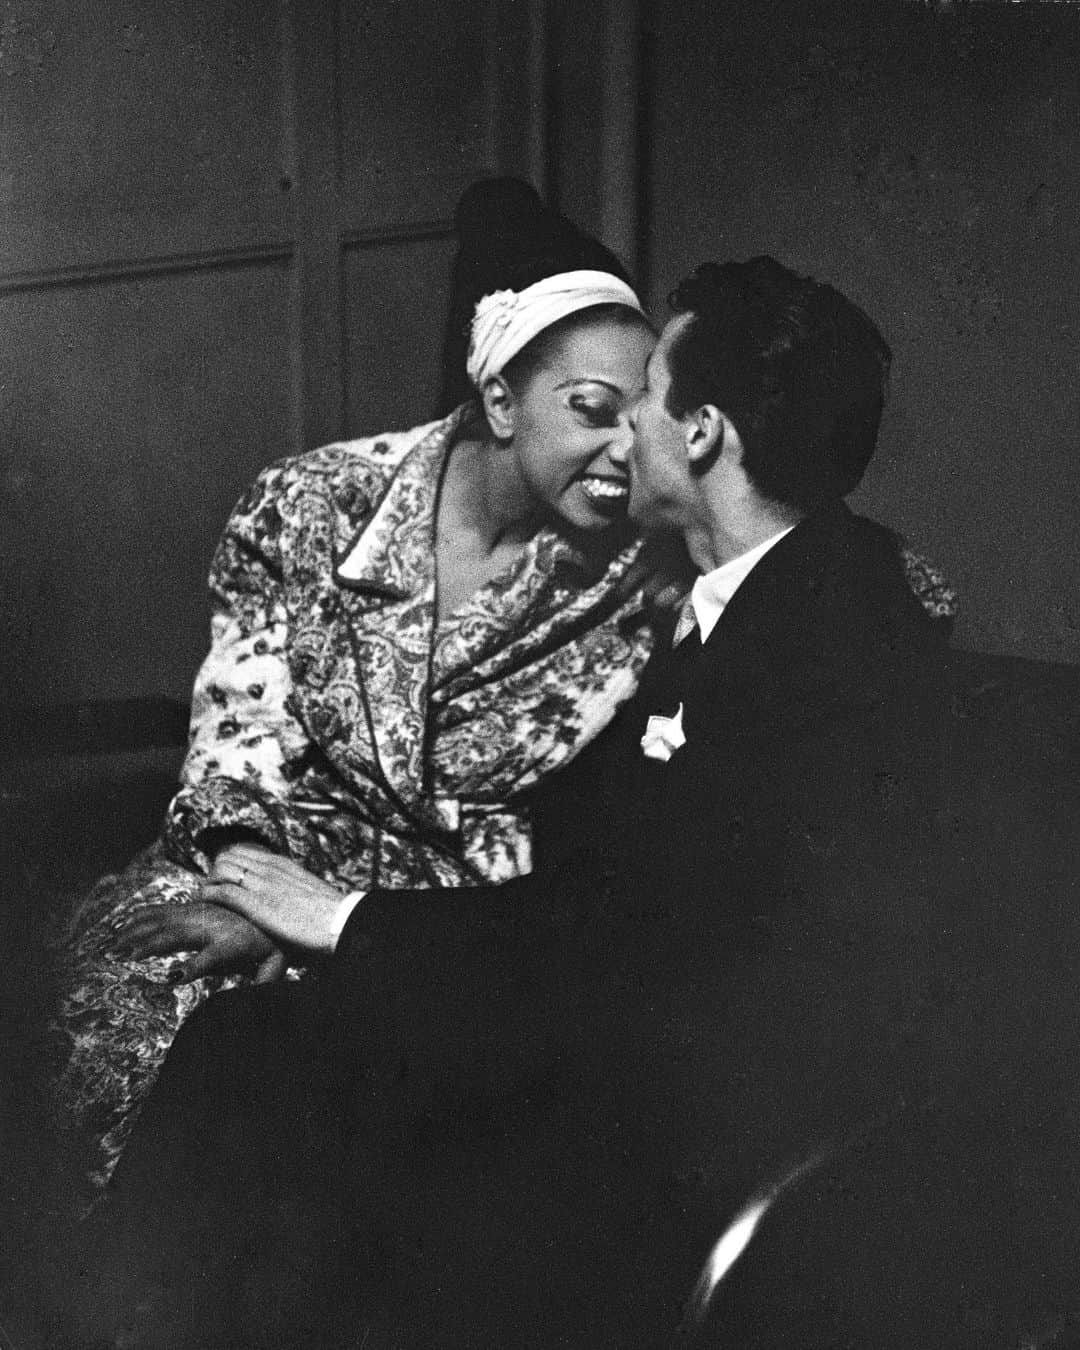 lifeのインスタグラム：「Entertainer Josephine Baker receiving a congratulatory kiss on the nose from her husband, orchestra leader Jo Bouillon, after her show at the Strand Theater during her U.S. tour, 1951.   Click the link in bio to see more photos of Baker - the Missouri native who became a legendary performer in Paris in the ’20s and ’30s.  (📷 Alfred Eisenstaedt/LIFE Picture Collection)   #LIFEMagazine #LIFEArchive #LIFEPictureCollection #JosephineBaker #Performer #AlfredEisenstaedt #LIFELegends #1950s #Jazz」